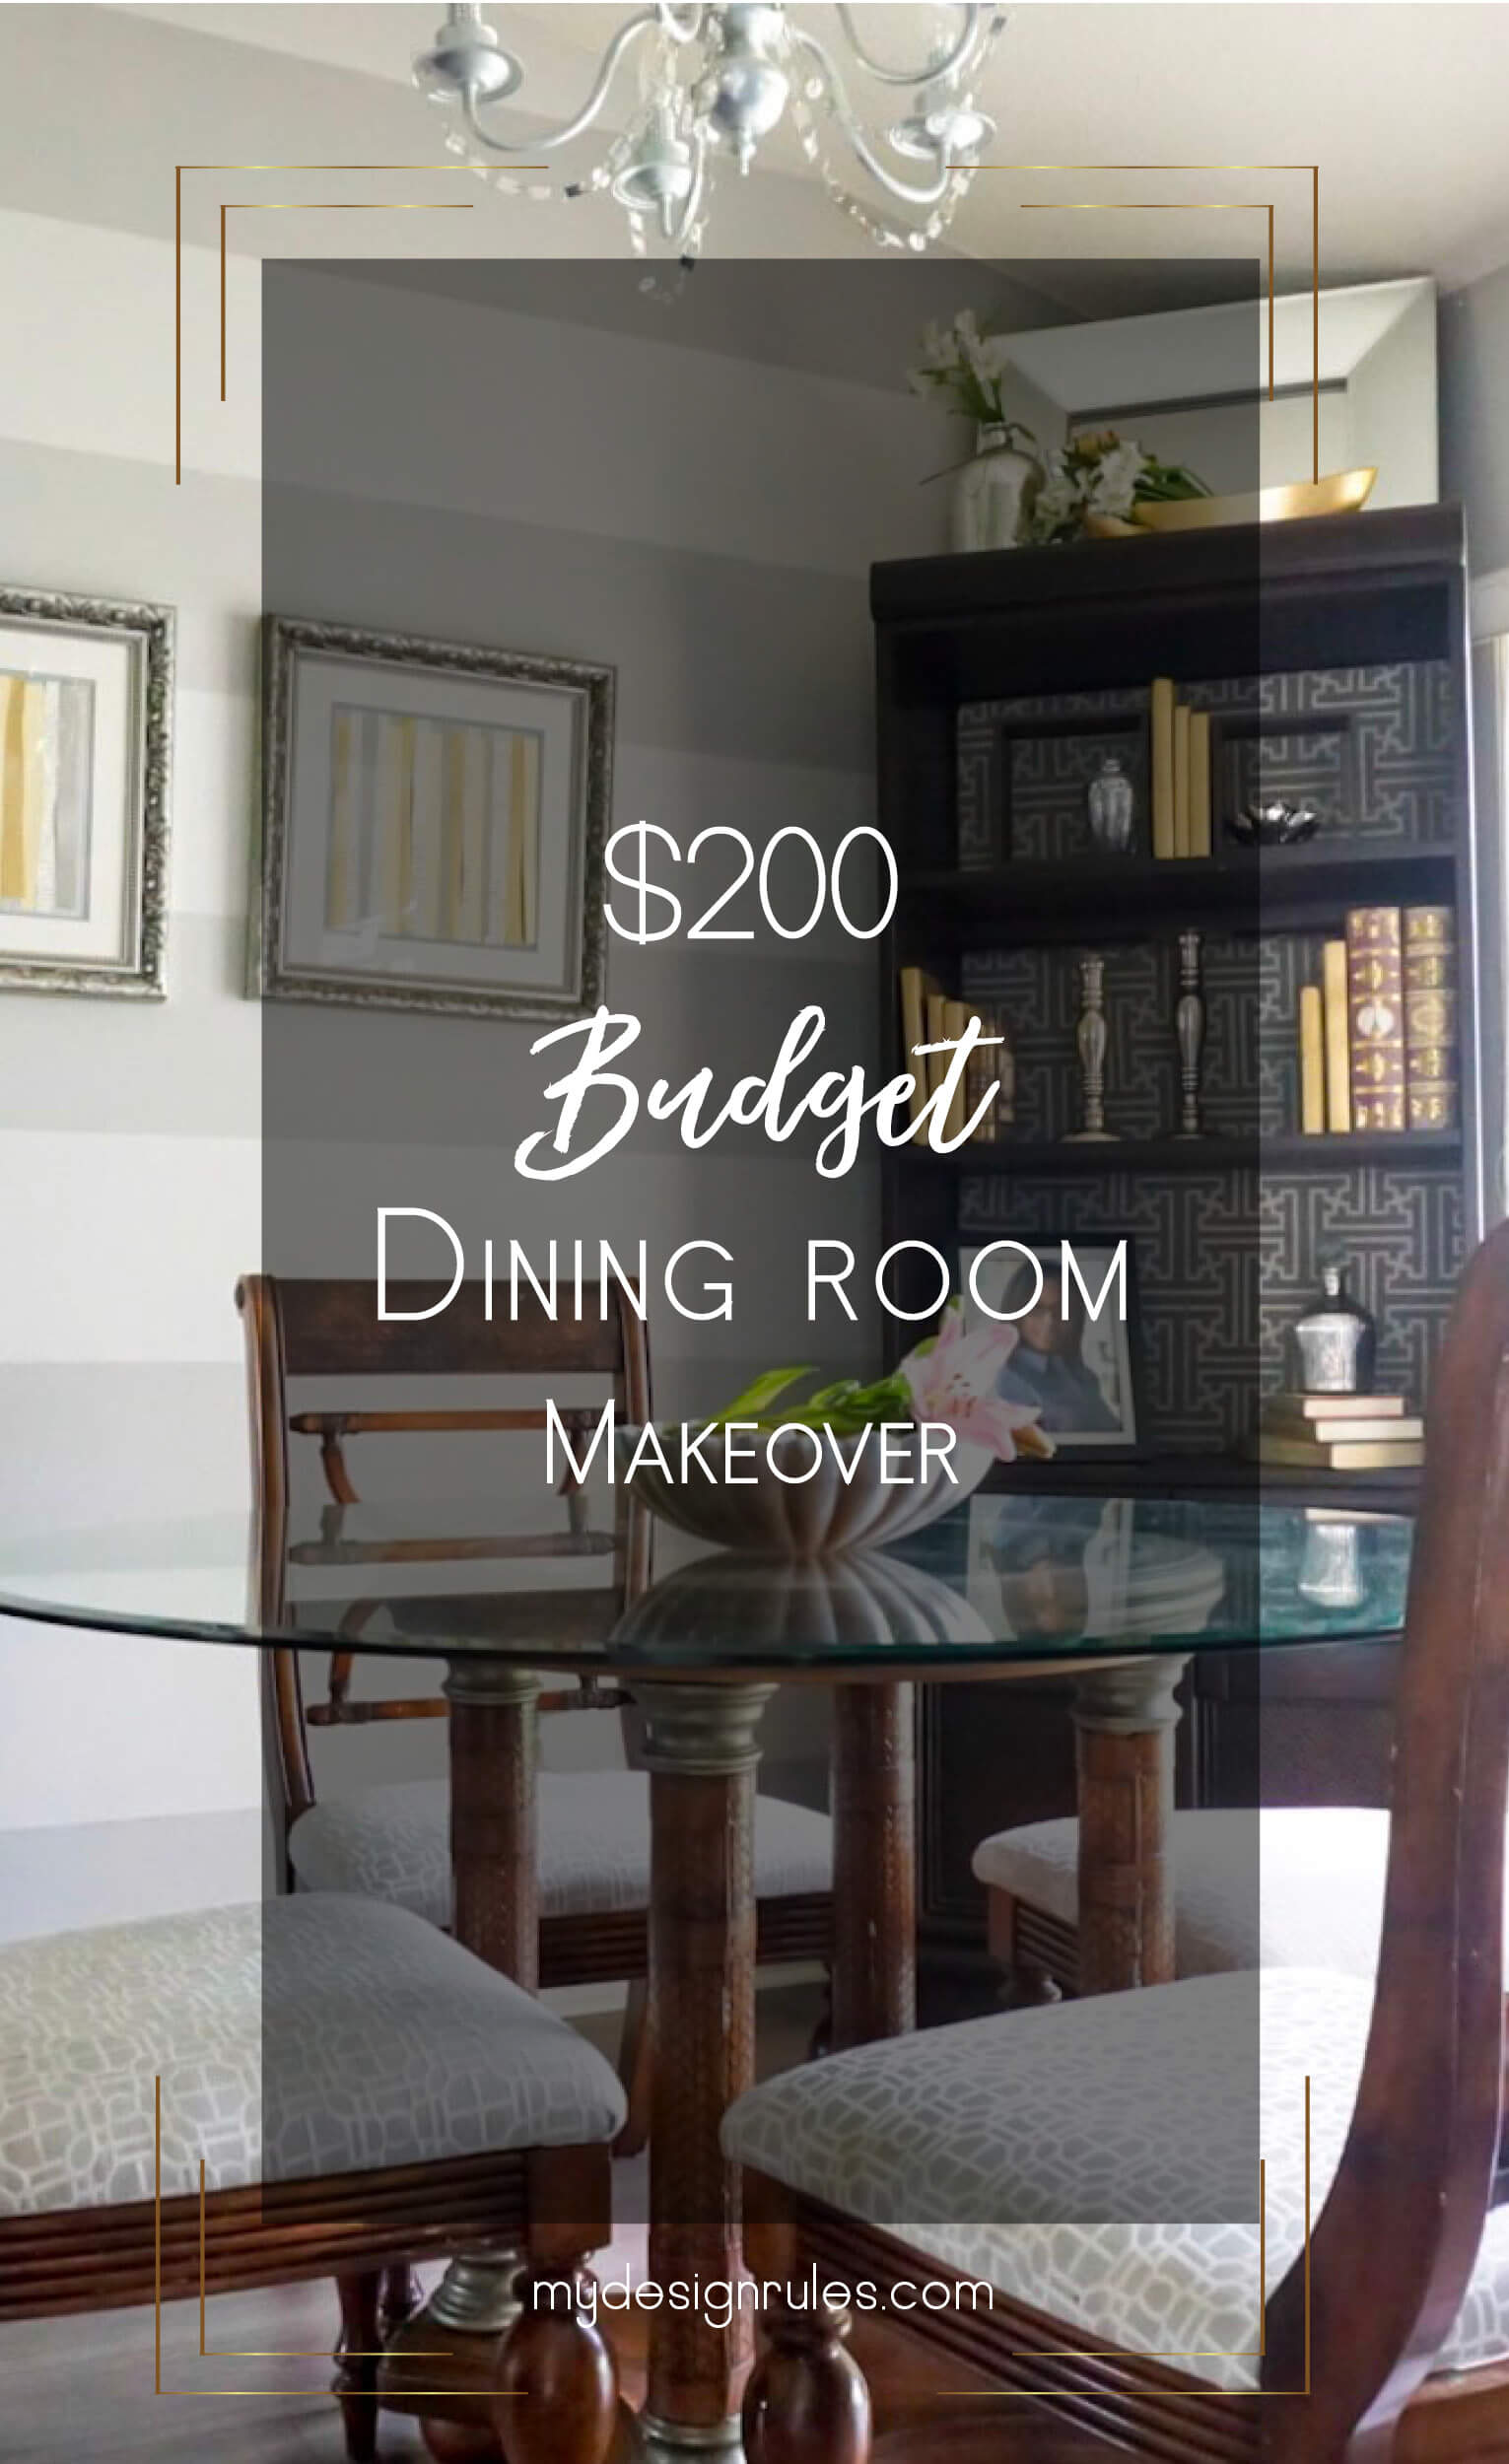 Give your dining room a makeover on a budget. Decorate a fabulous room on a budget.